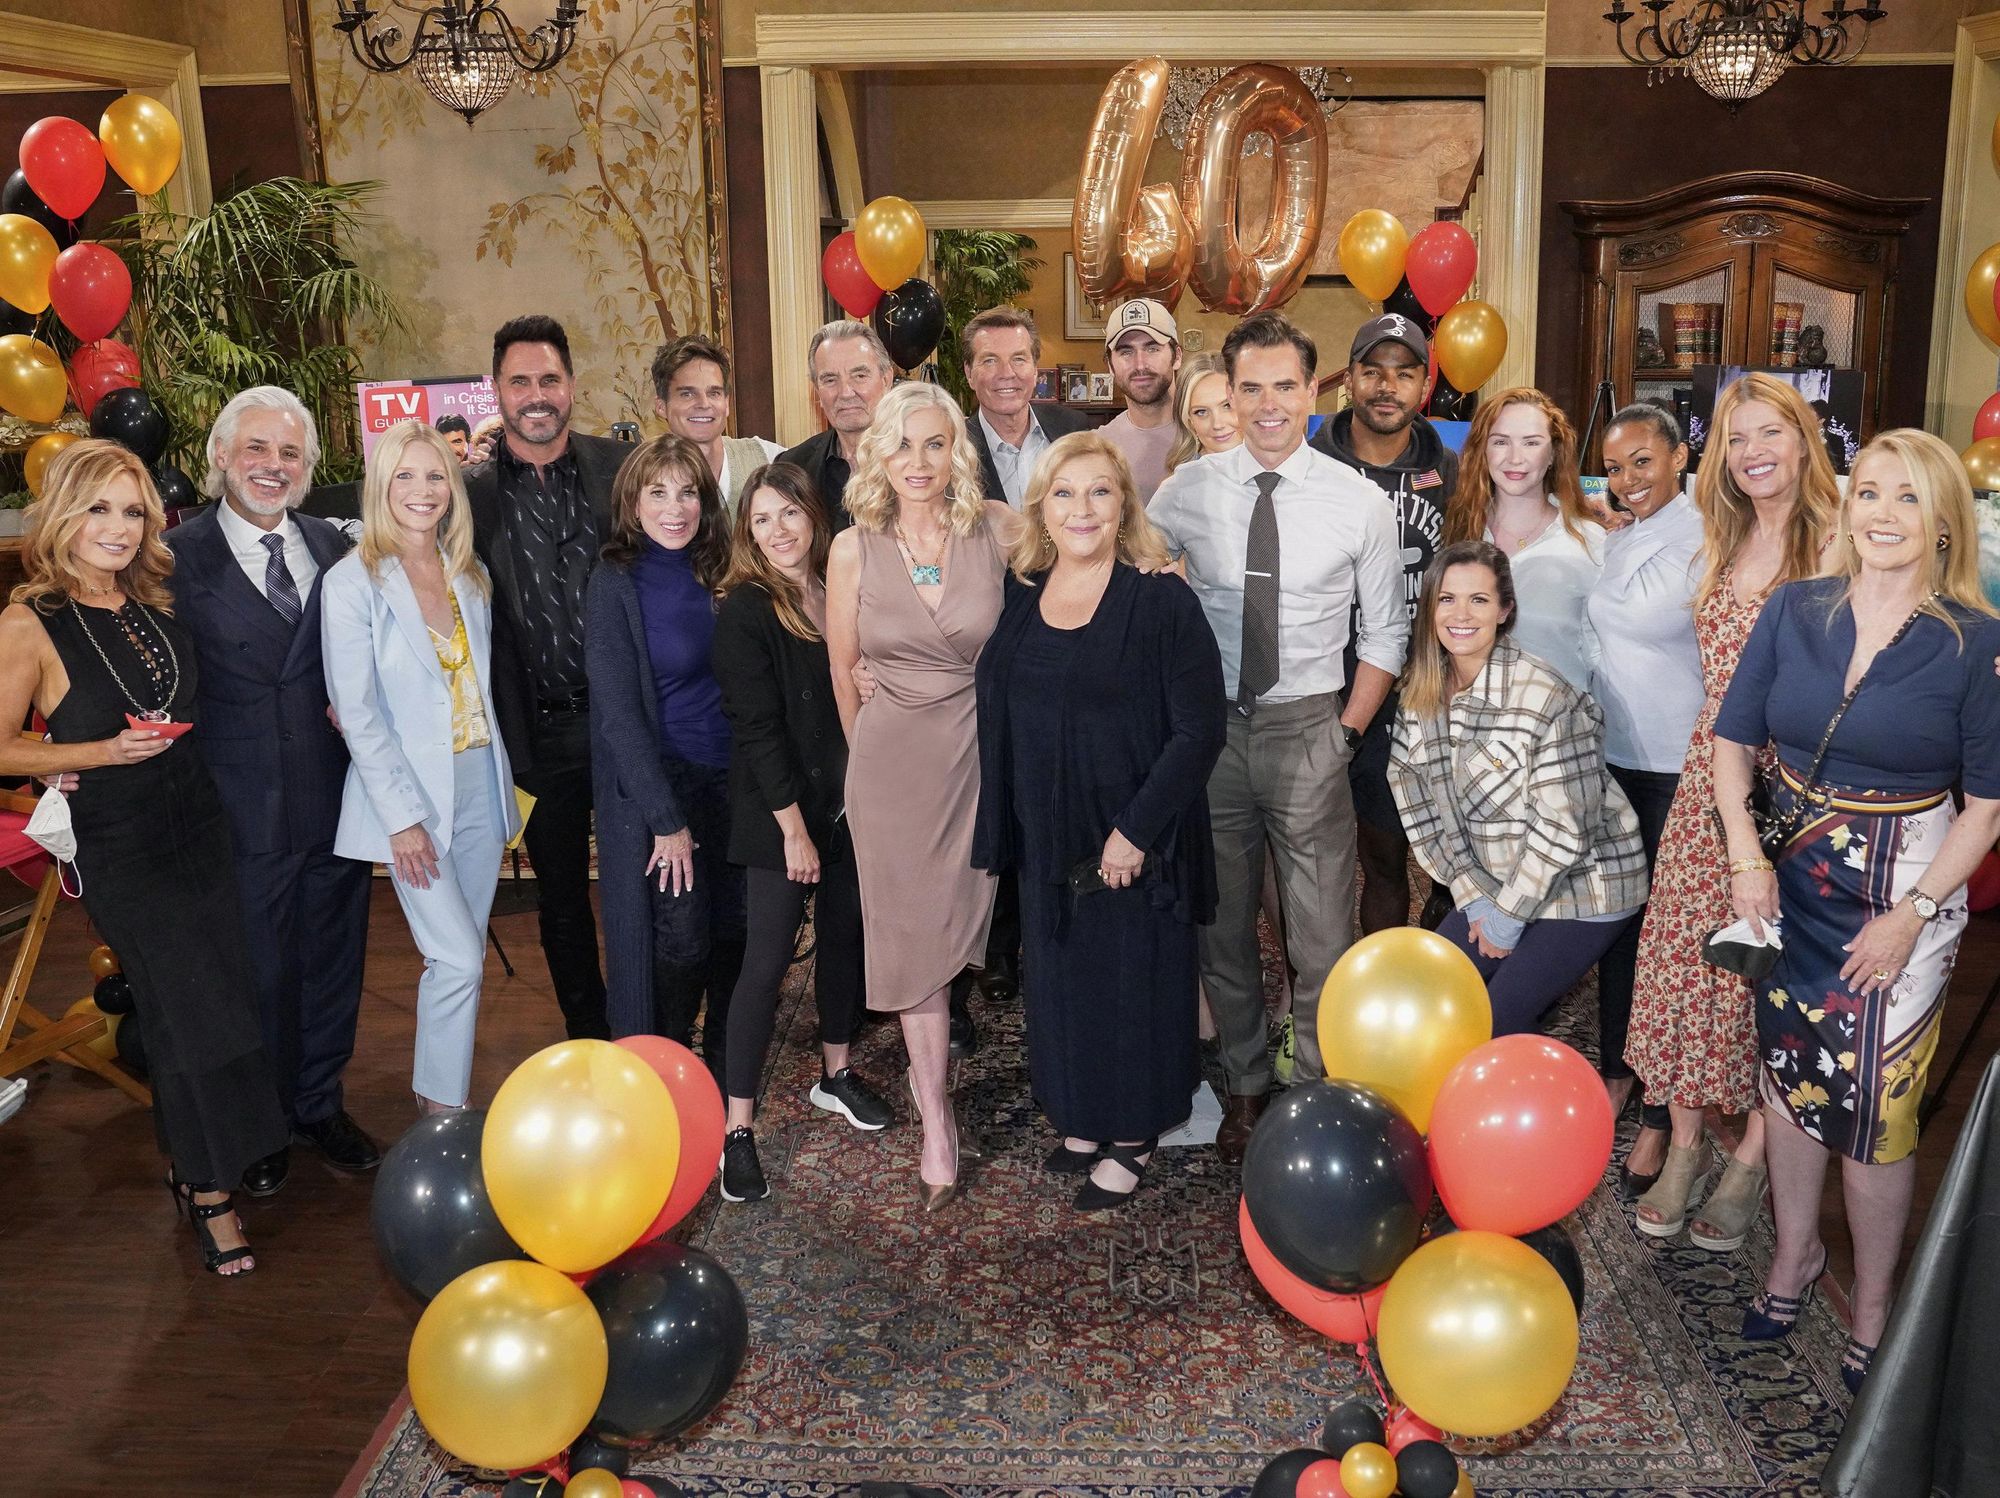 Eileen Davidson and Beth Maitland surrounded by their cast mates and balloons